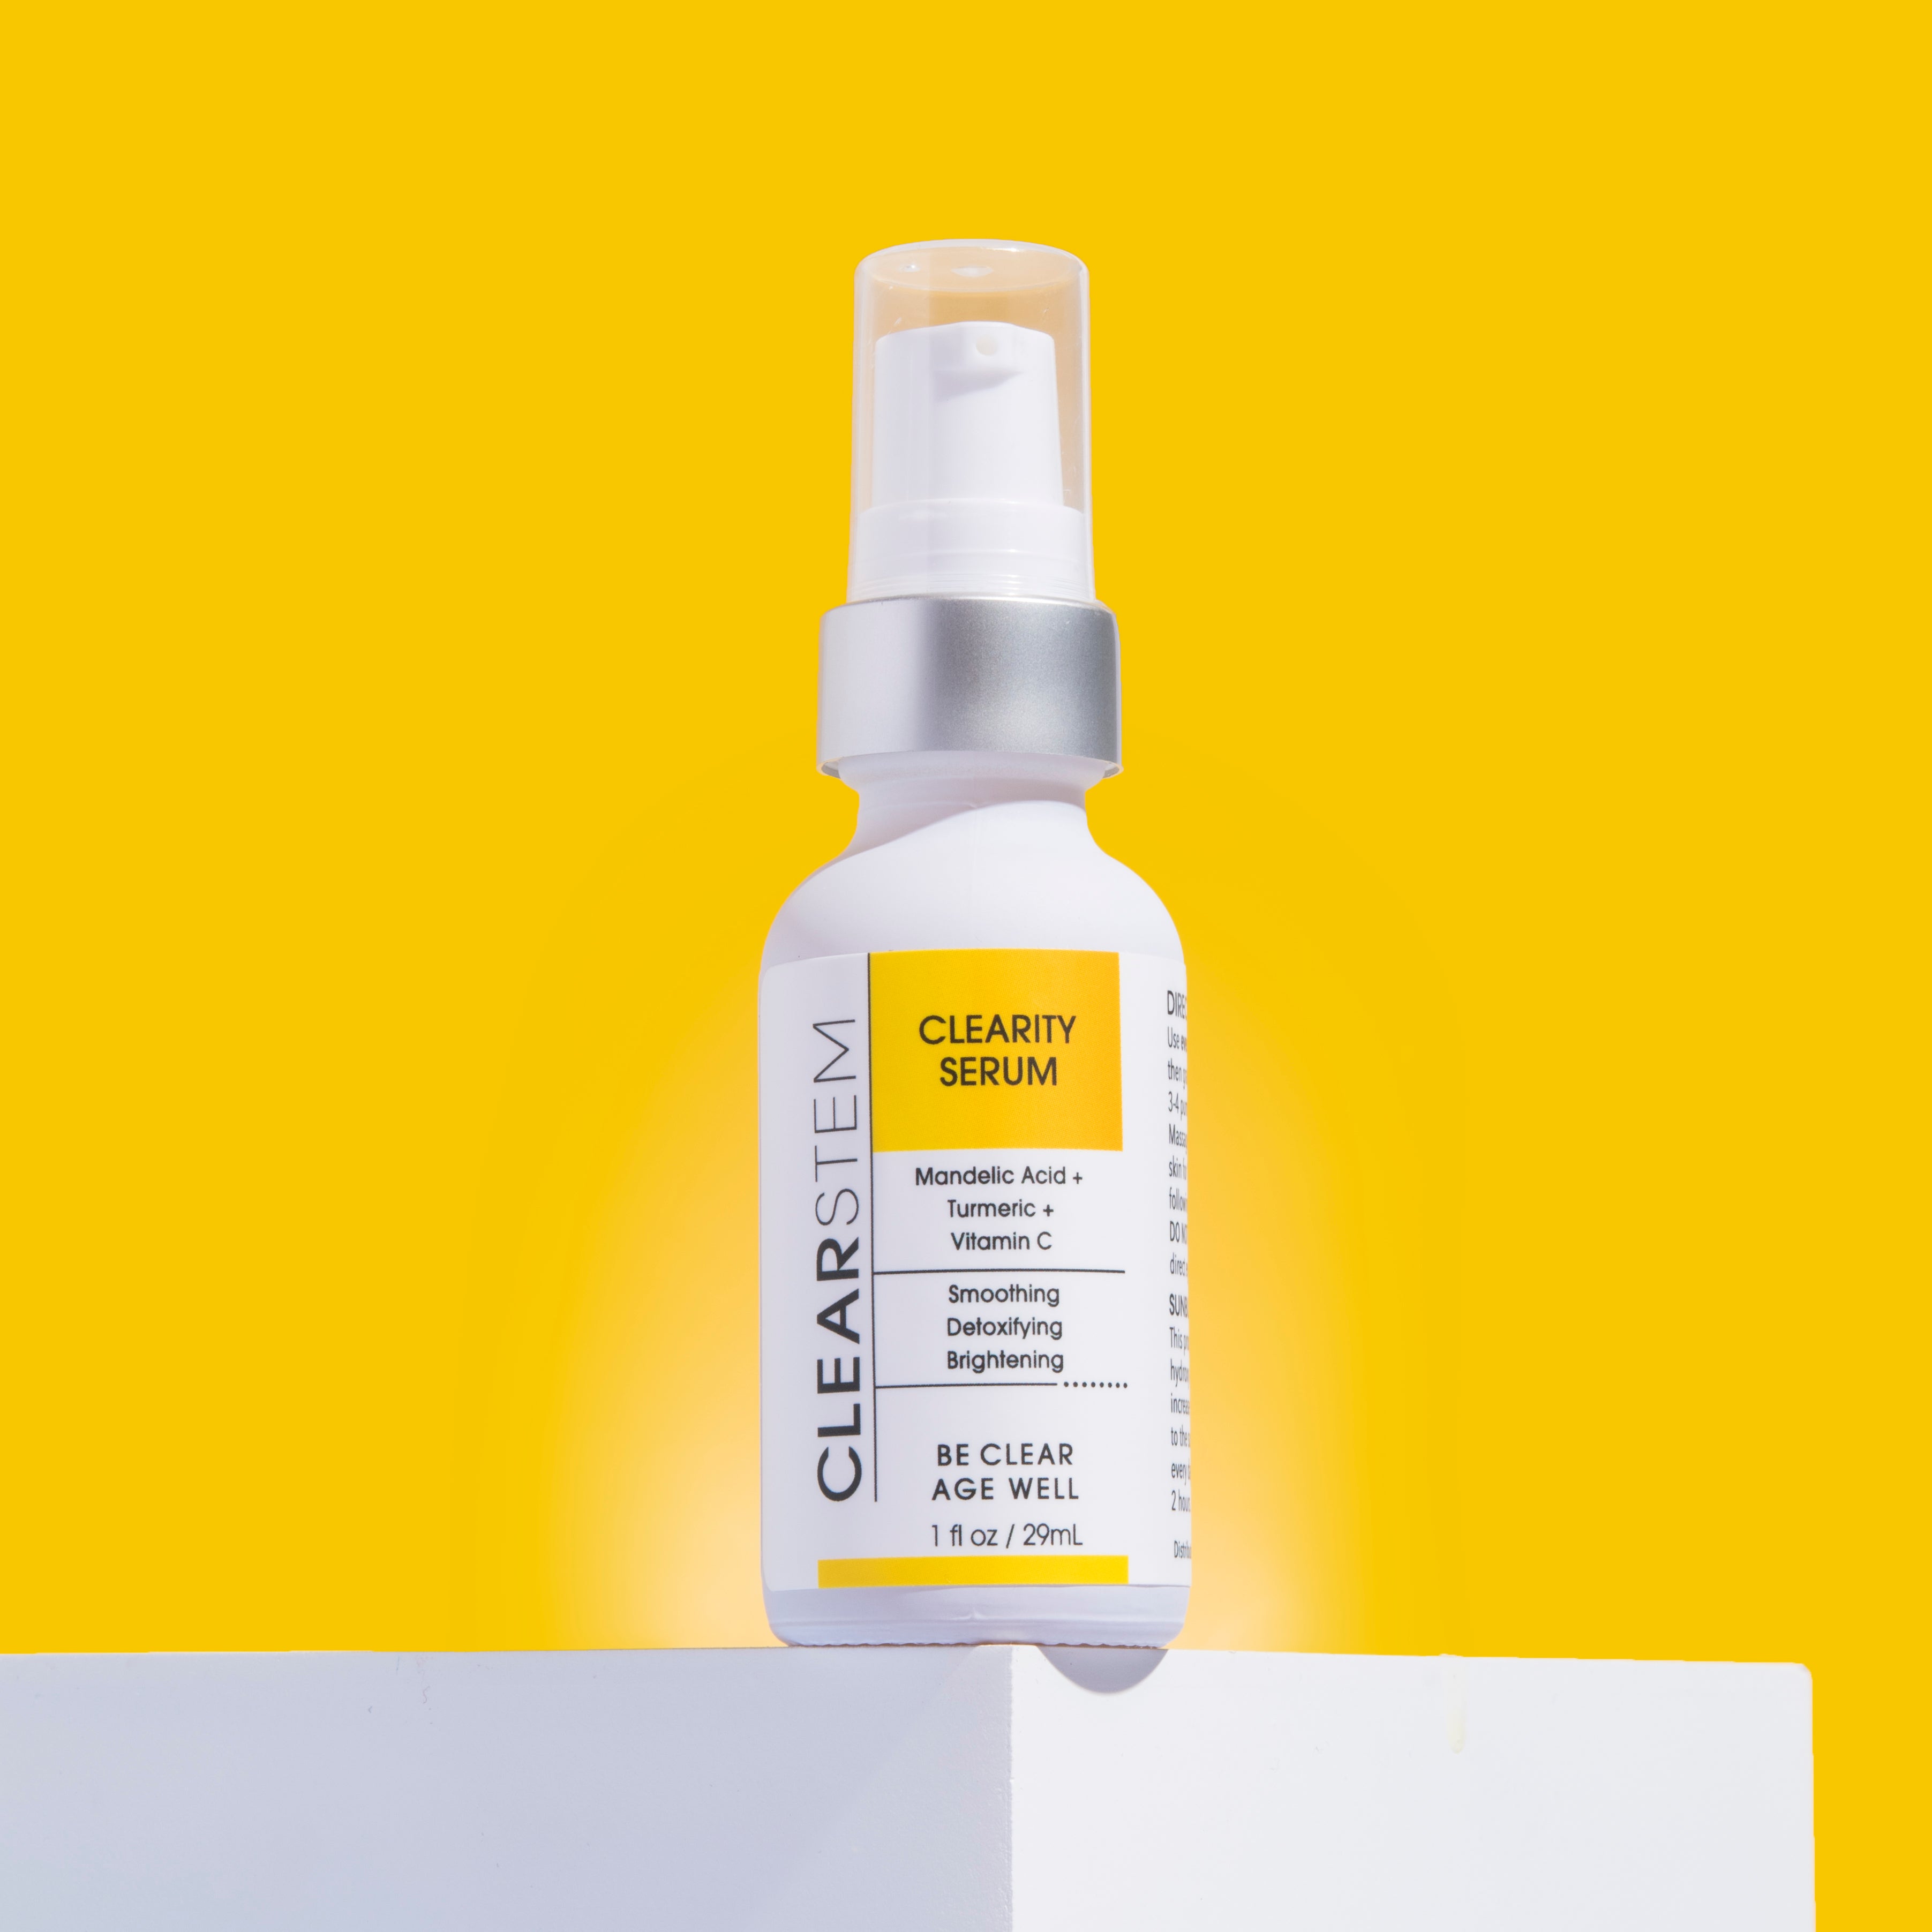 white clearstem clearity serum bottle with yellow background